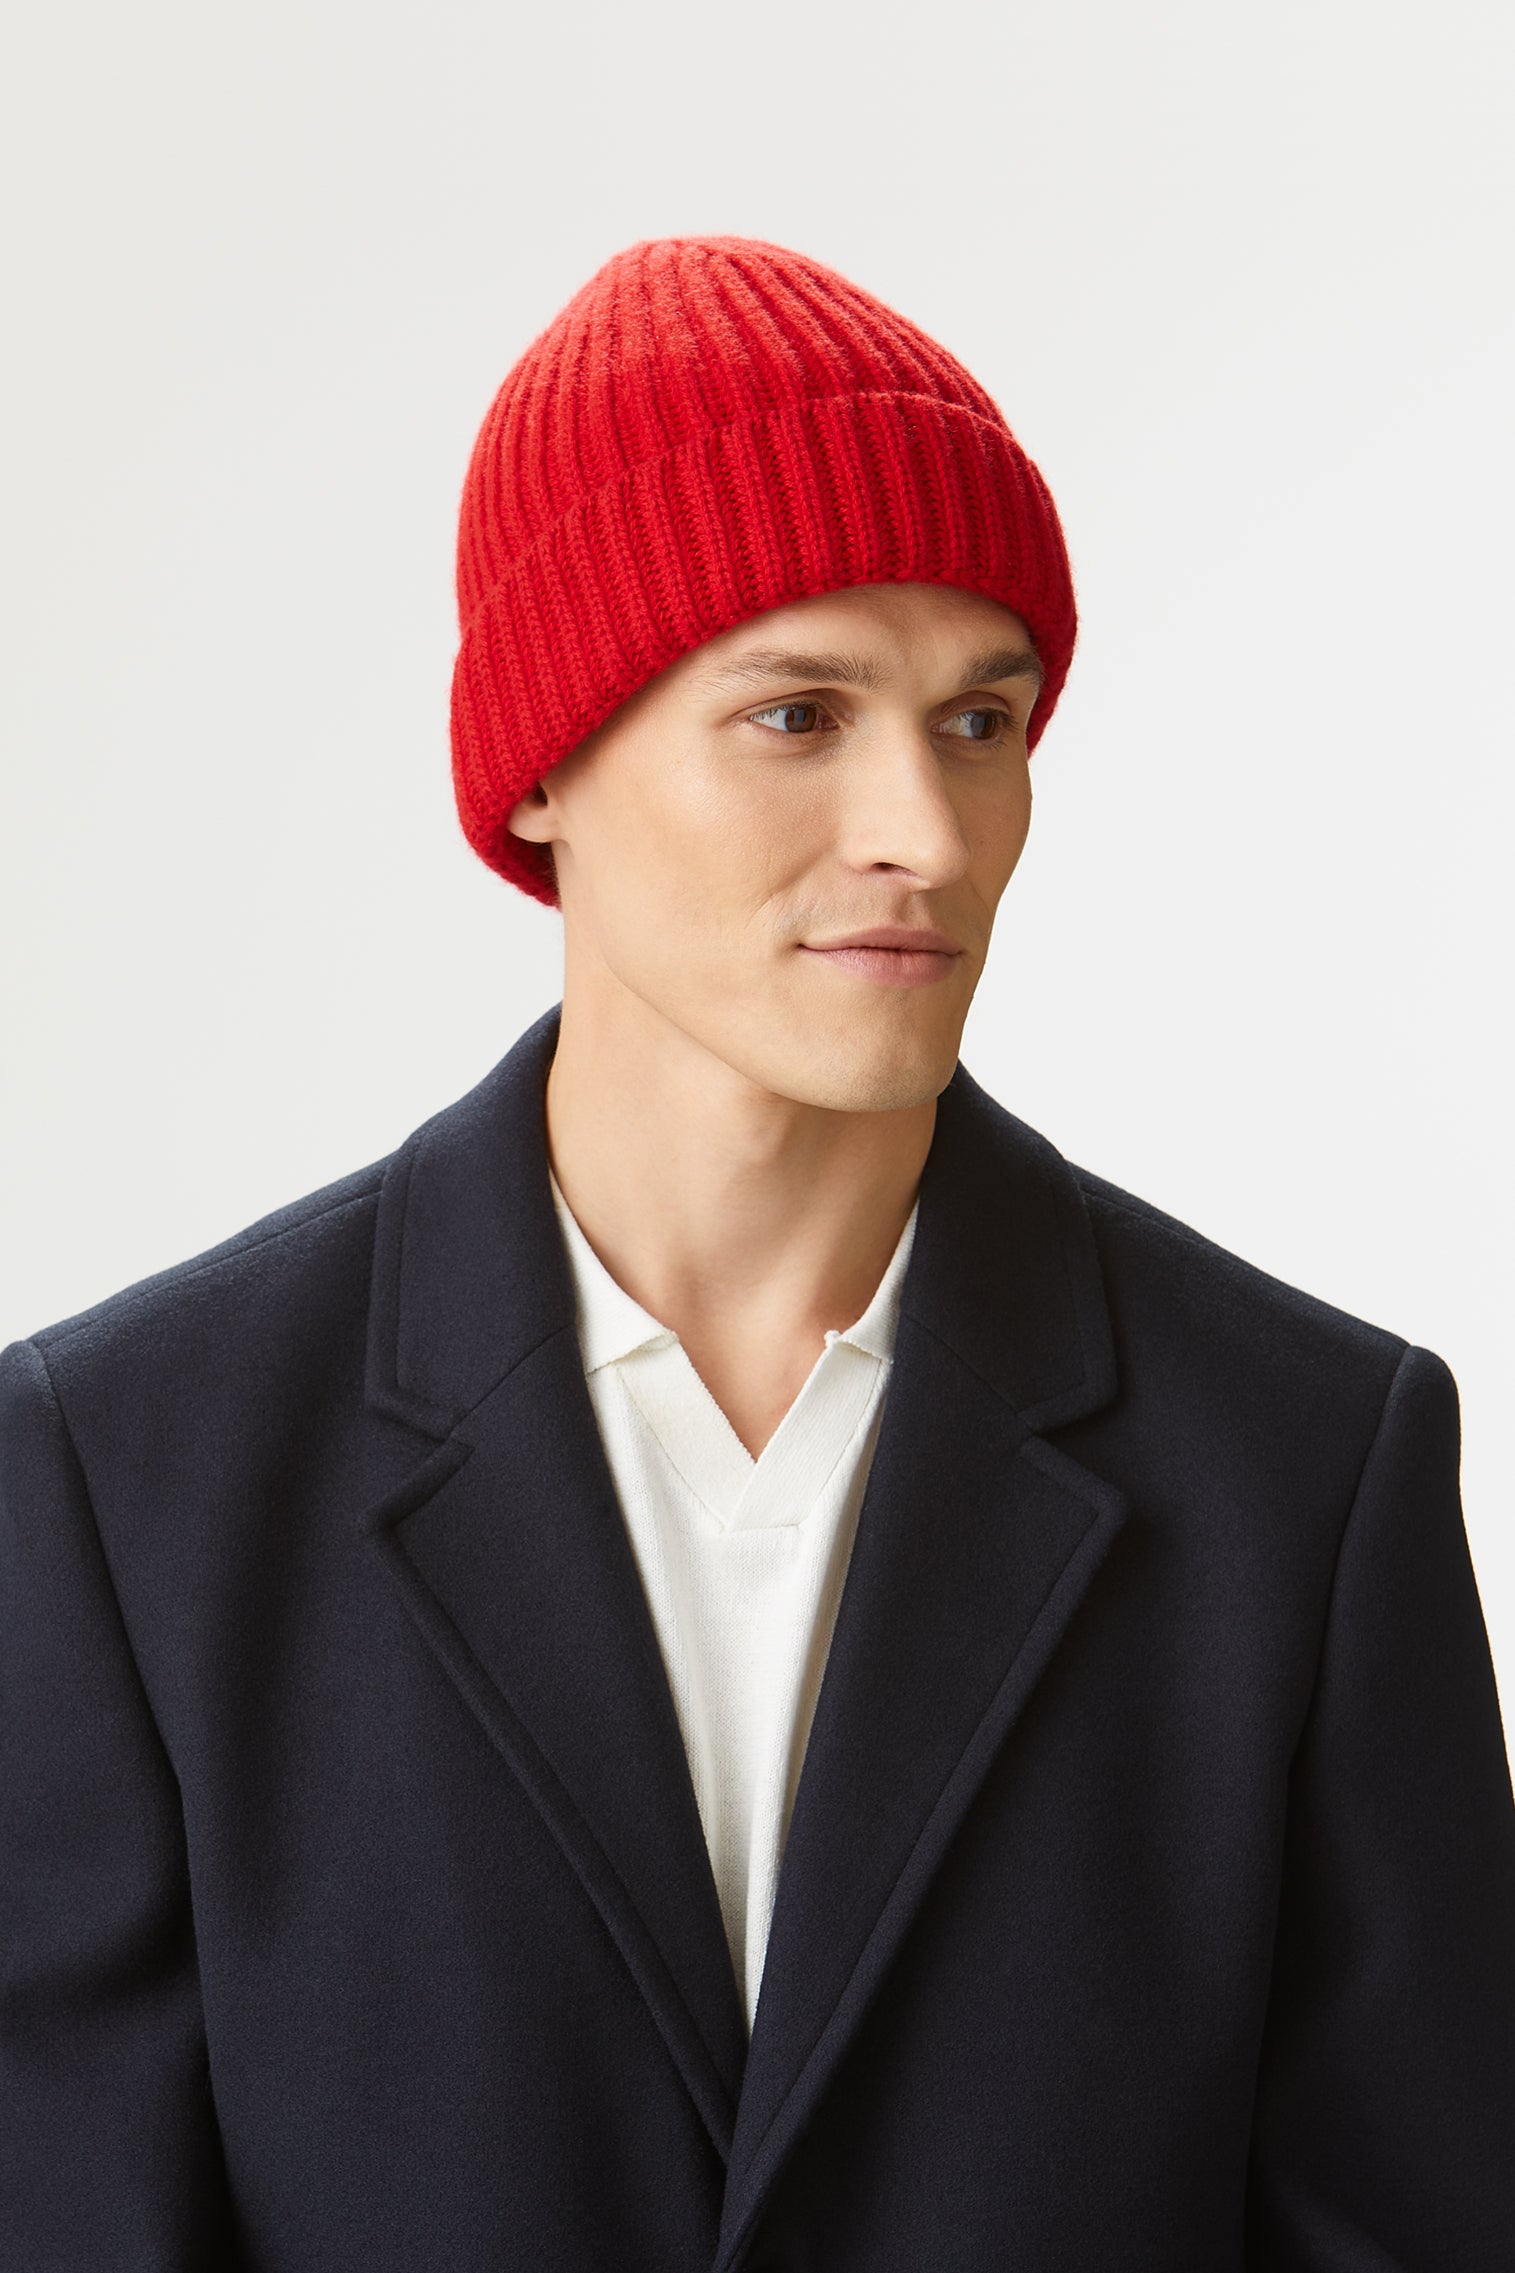 Rannoch Red Cashmere Beanie - Hats for Slimmer Frames - Lock & Co. Hatters London UK